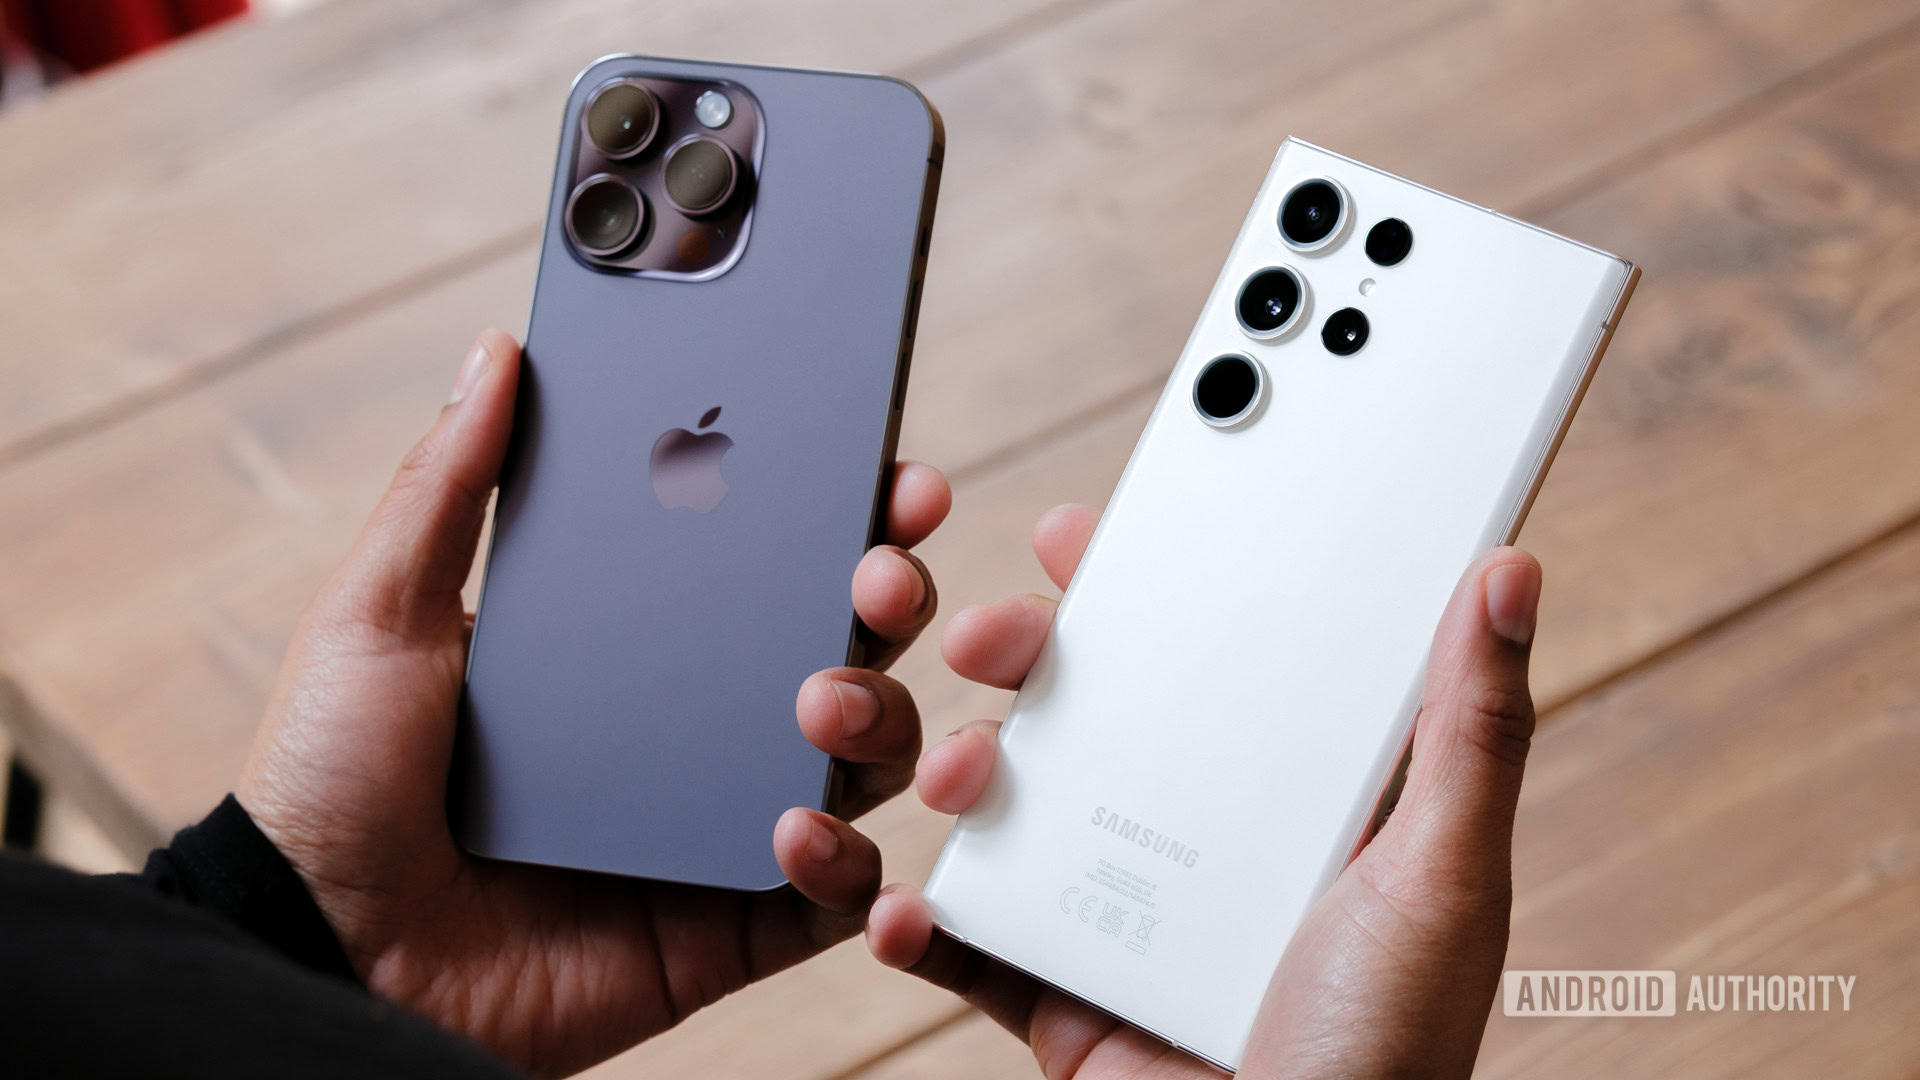 iPhone 15 Pro Max vs iPhone 14 Pro Max: Is the price bump worth it?